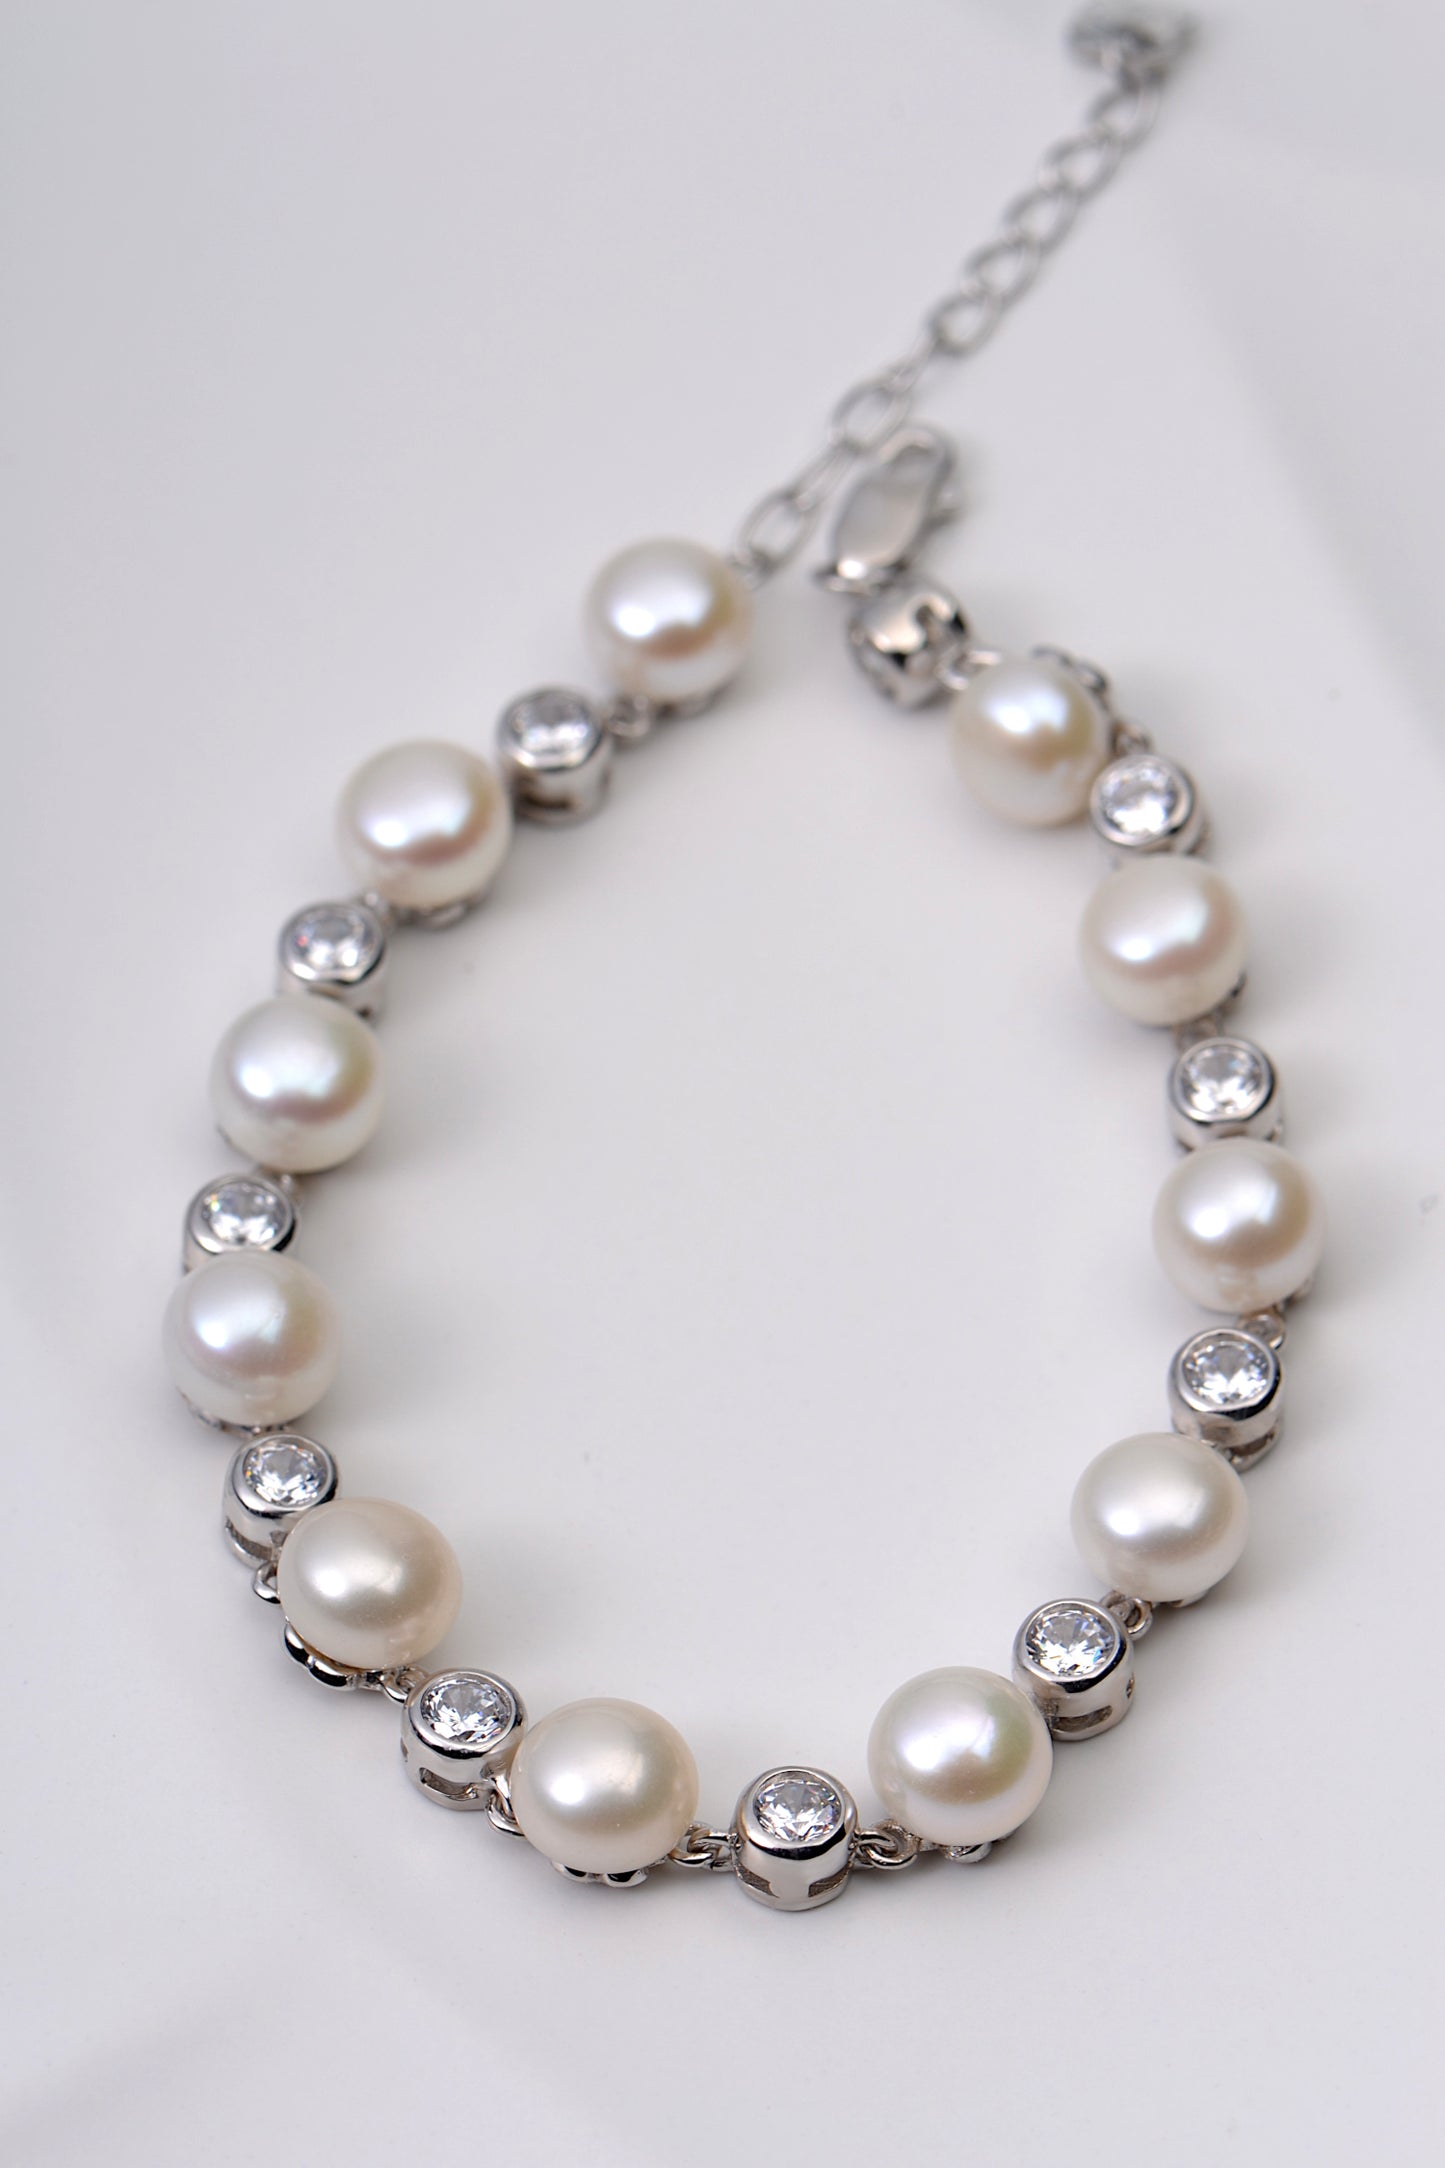 silver pearl bracelet with alternating round sparkly cubic zirconias and adjustable chain at back so it can be altered to fit different wrist sizes